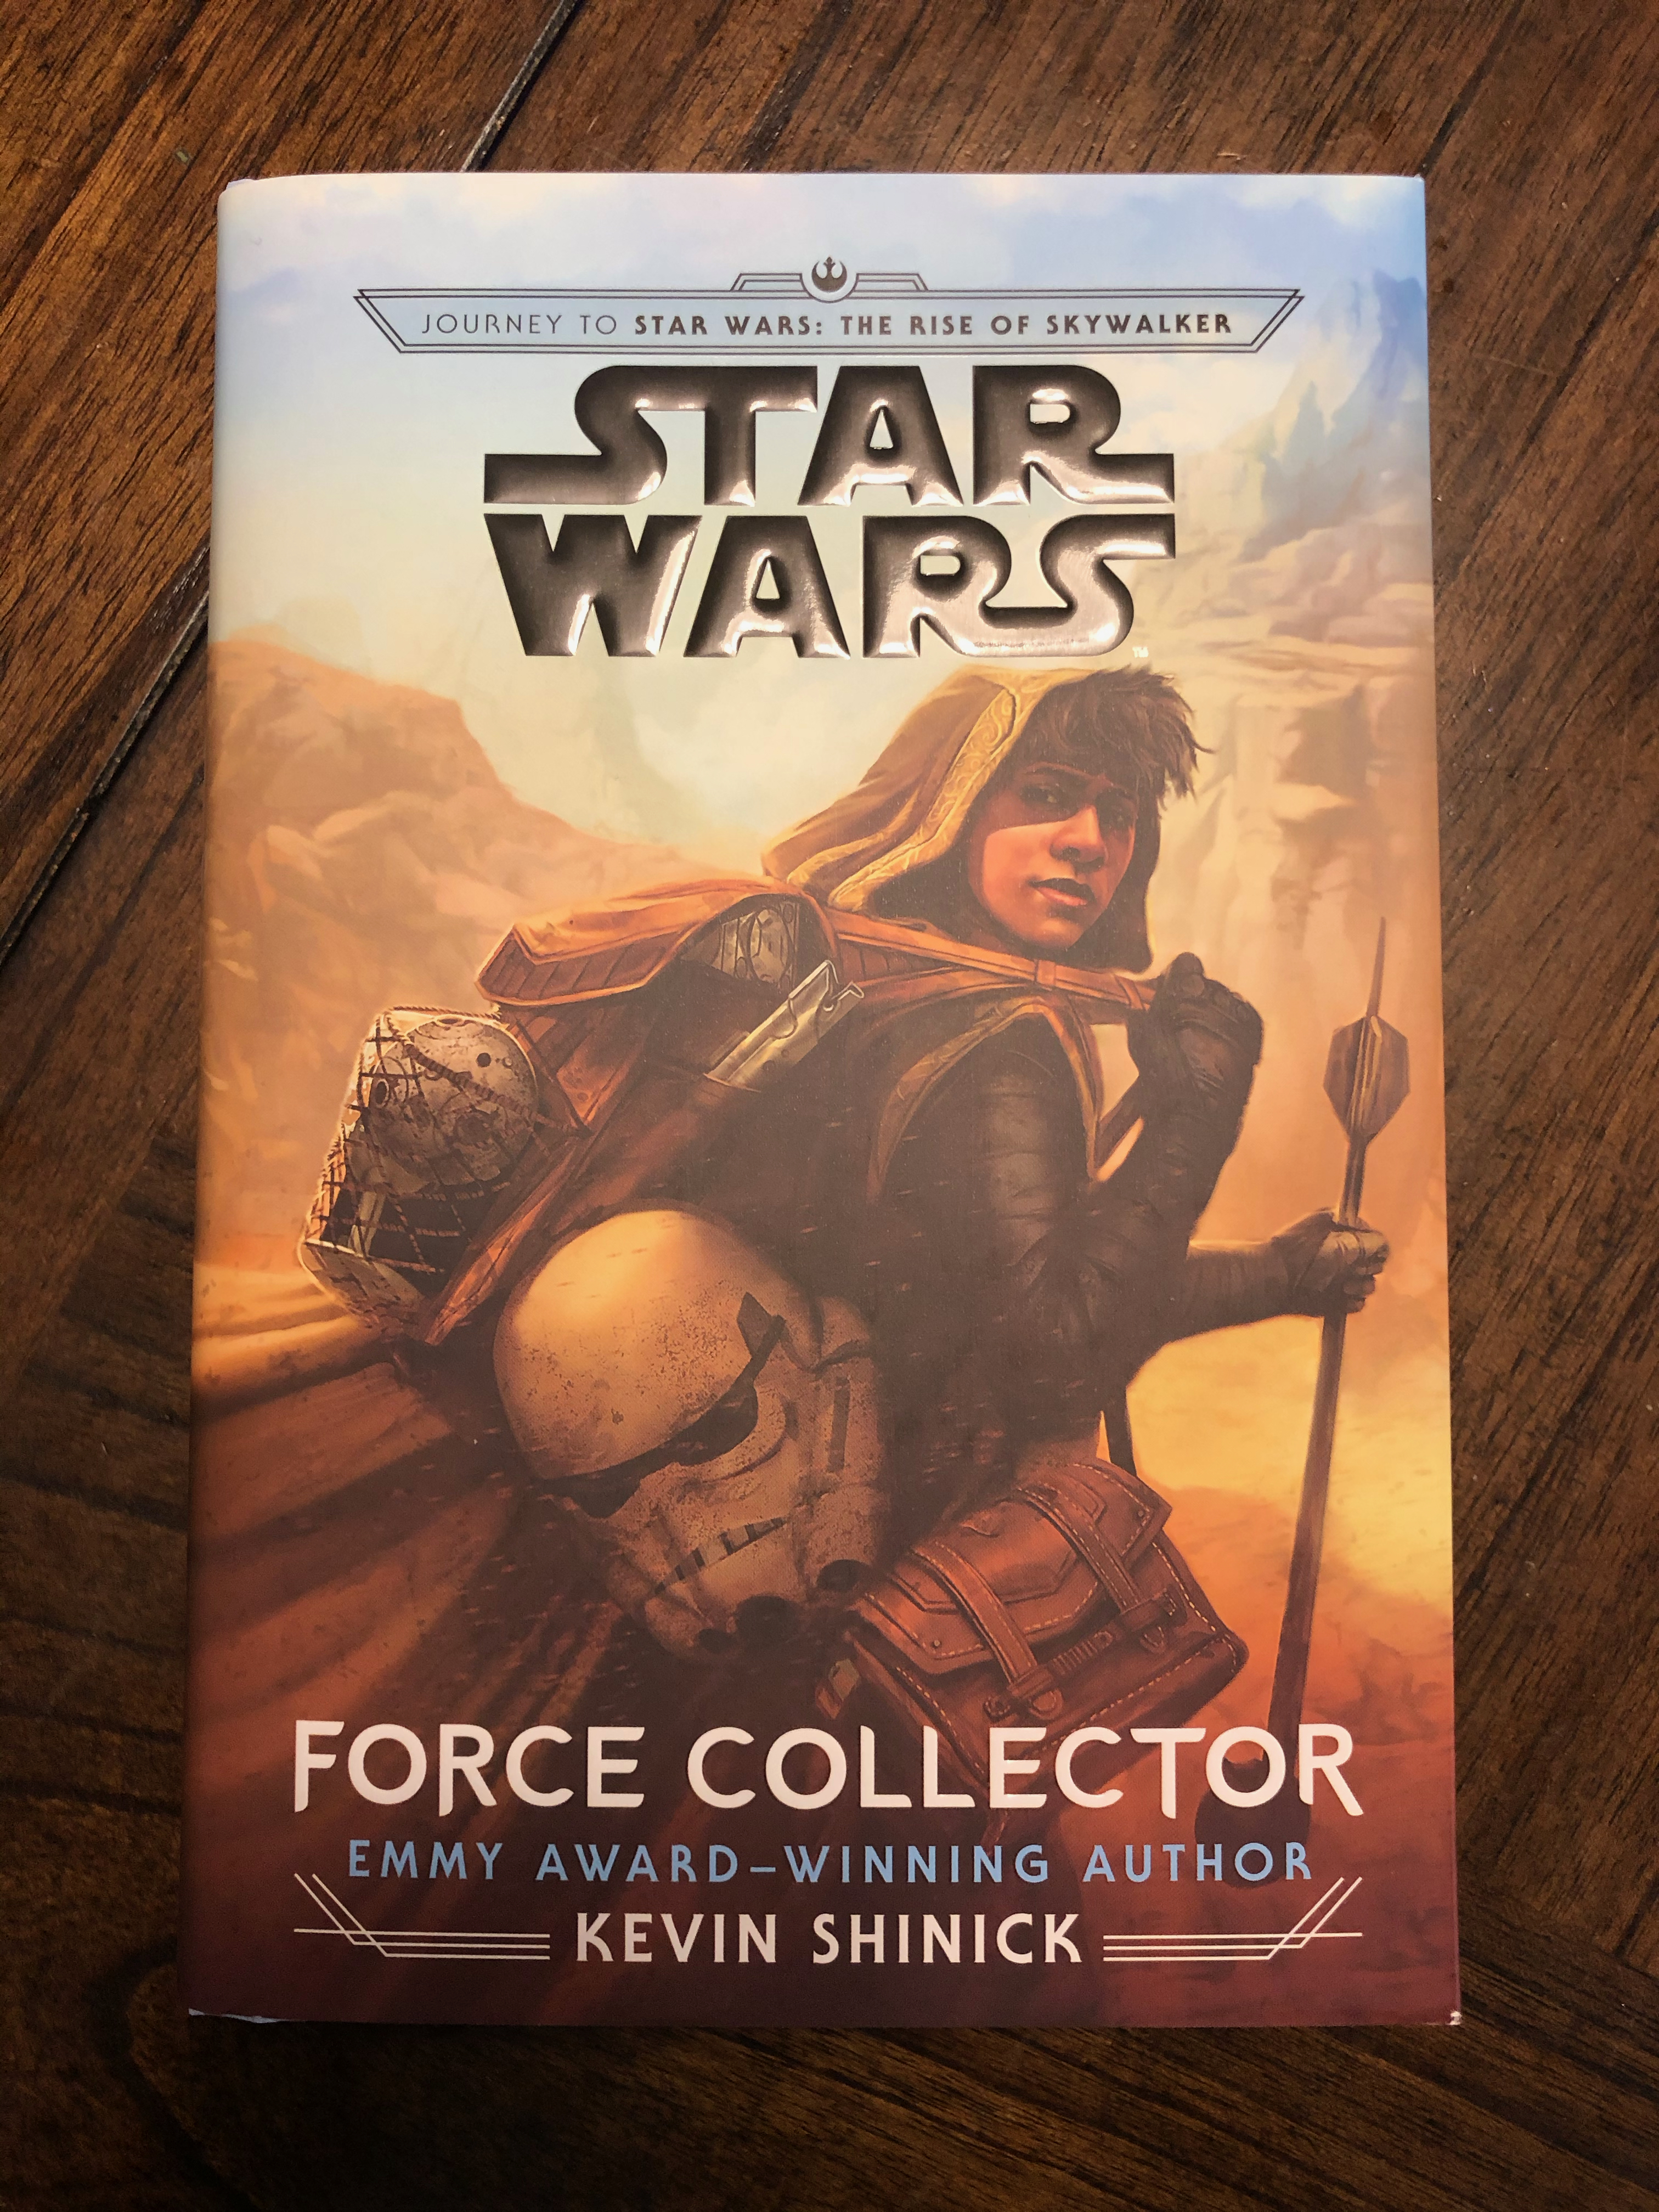 force collector